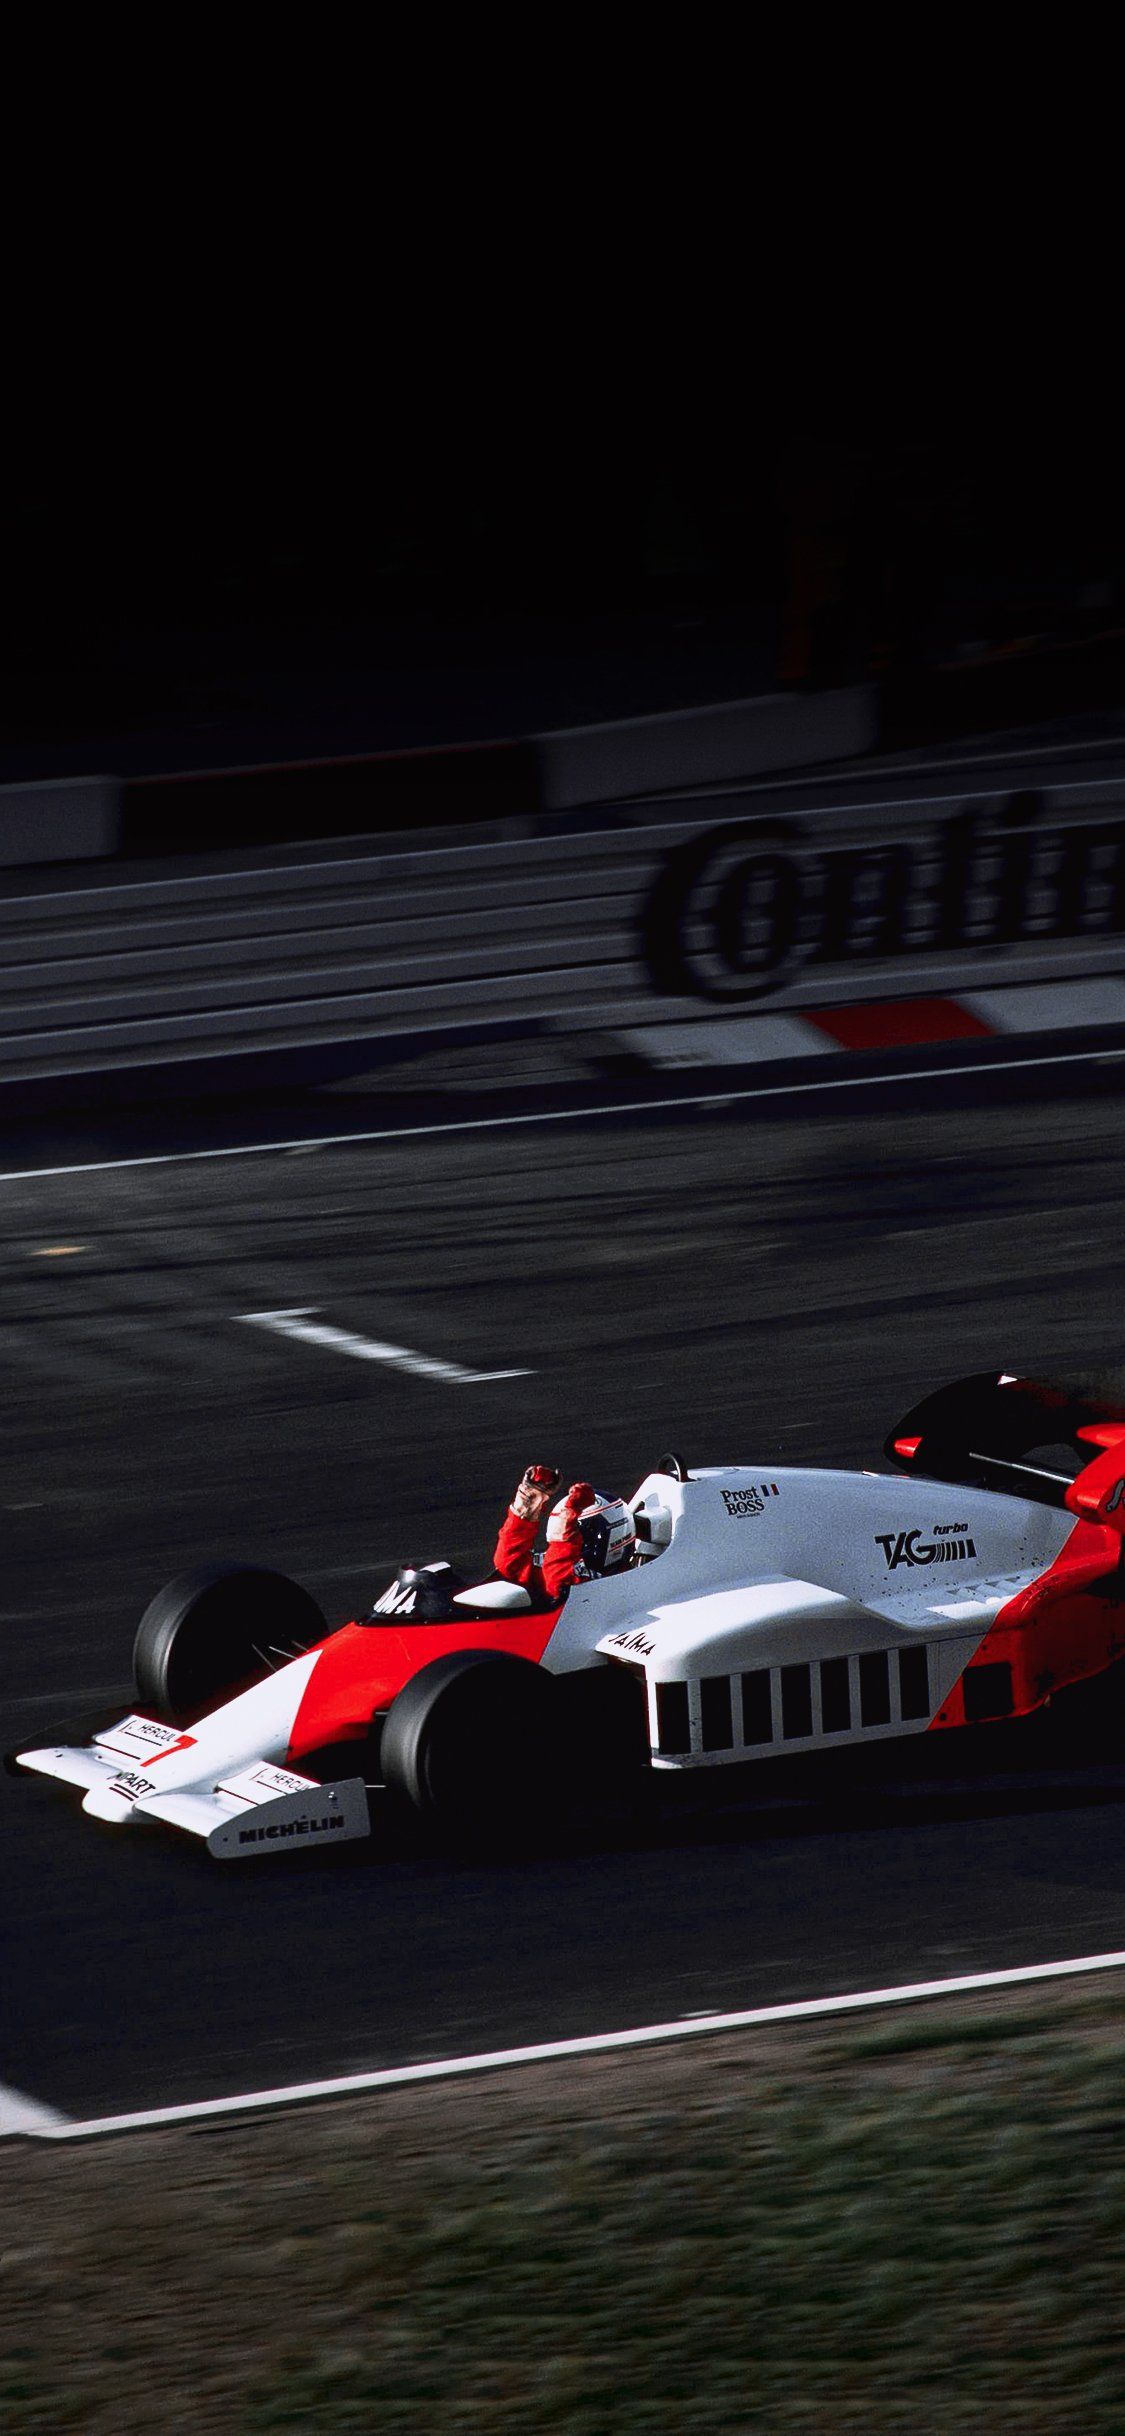 Alain Prost on Ayrton Senna: “Between Us, We Can Screw All the Others!”